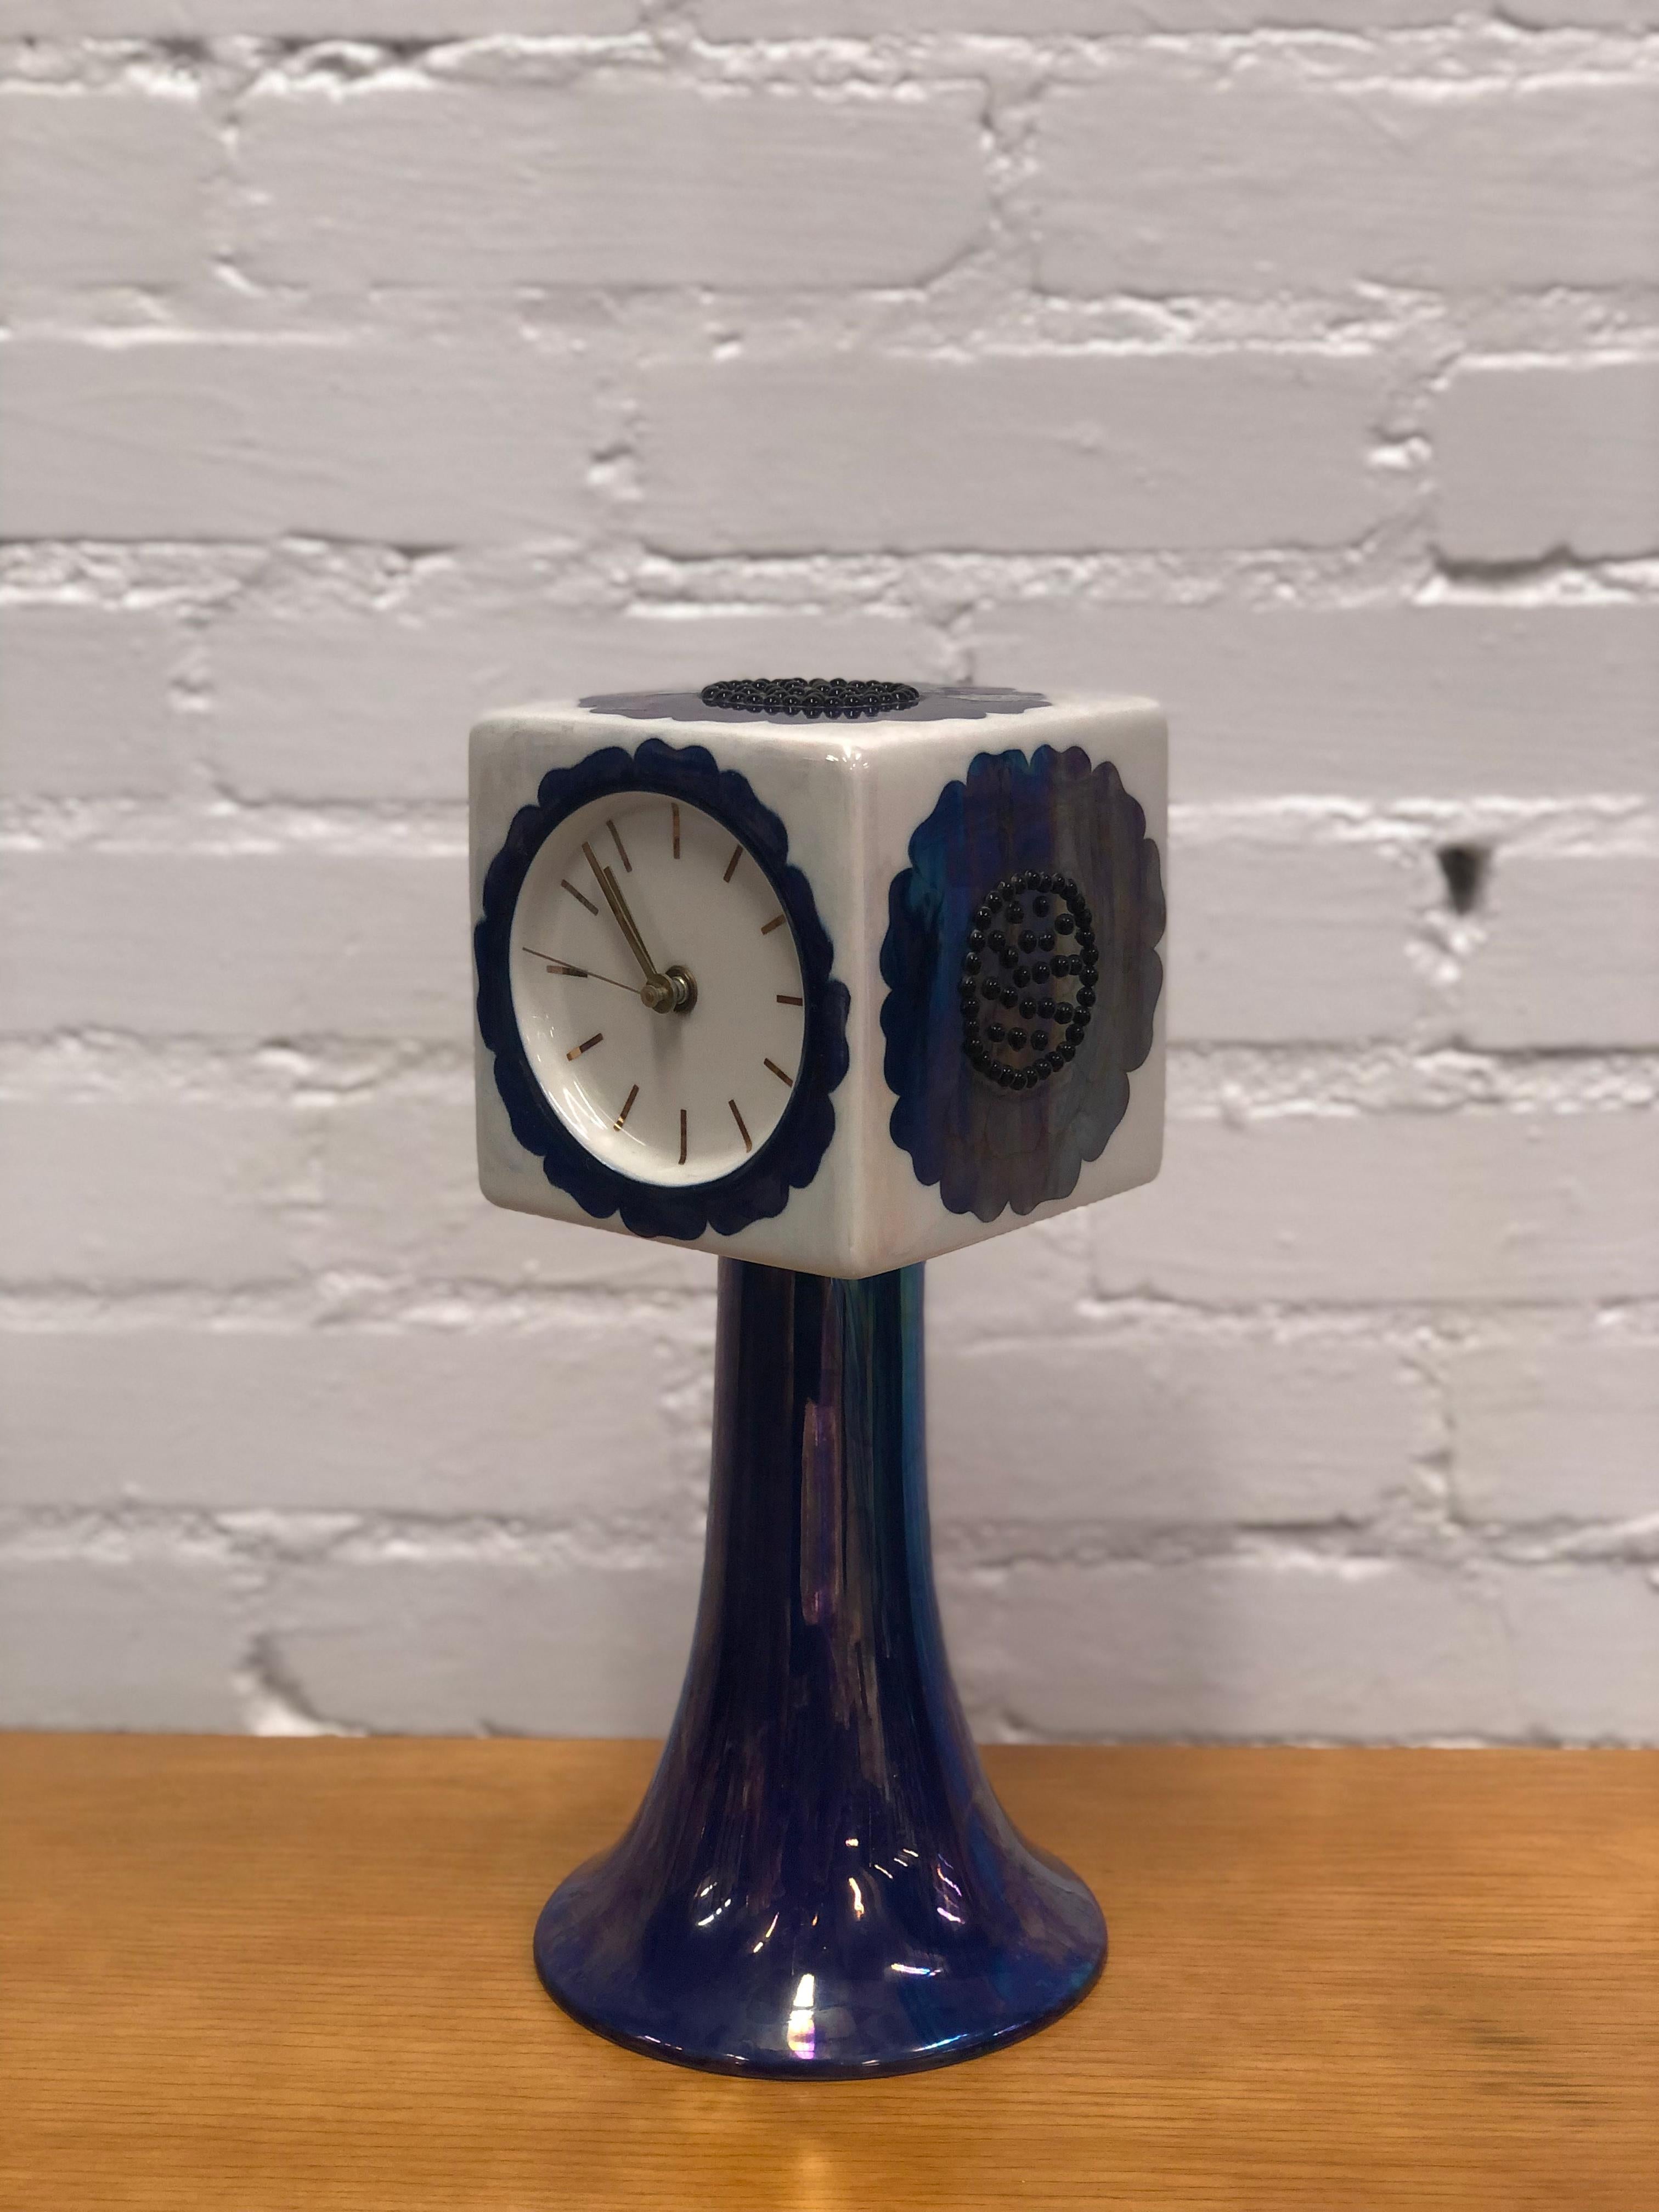 Birger Kaipiainen had a thing for clock´s. Frequently in his decorative dishes he had clock`s that were always pointing to 12:15.
Now here is the whole thing. In perfect working order and a very good condition indeed. The clock is stamped Birger